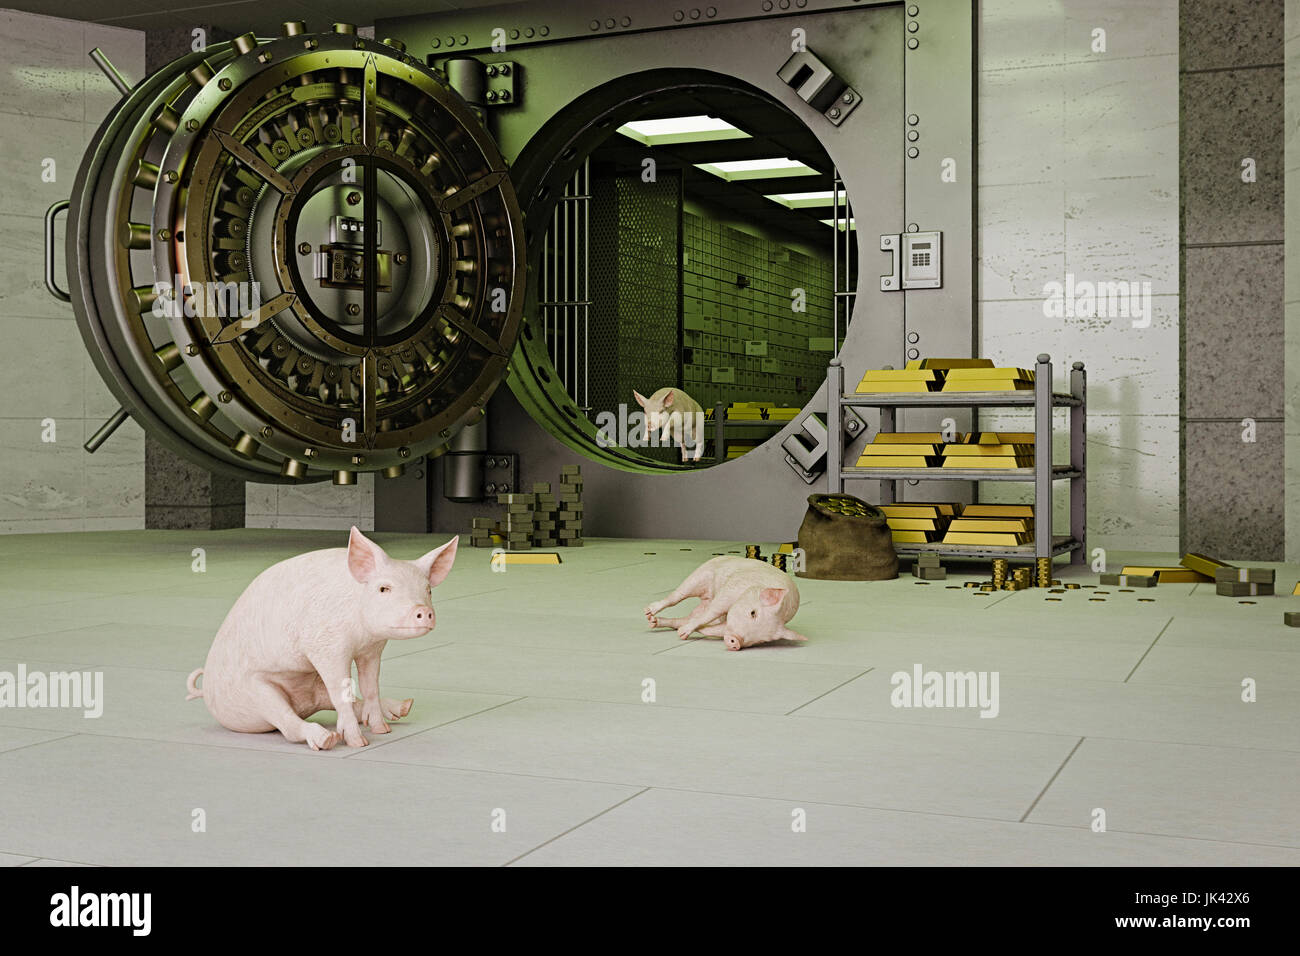 Pigs escaping from vault Stock Photo